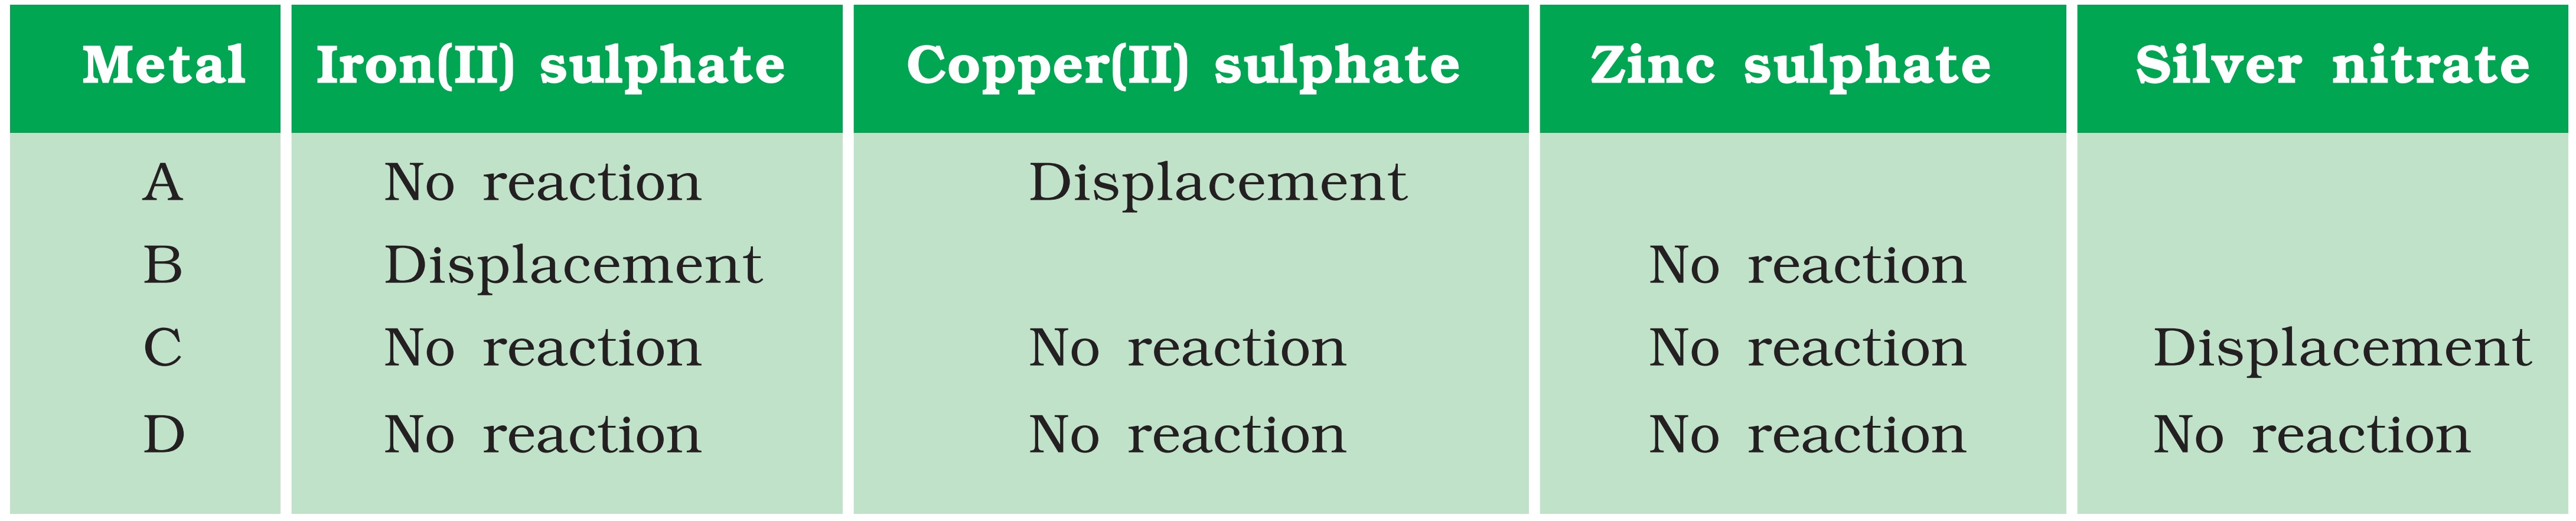 Q 3 page 46 - class 3 science - question image.jpg